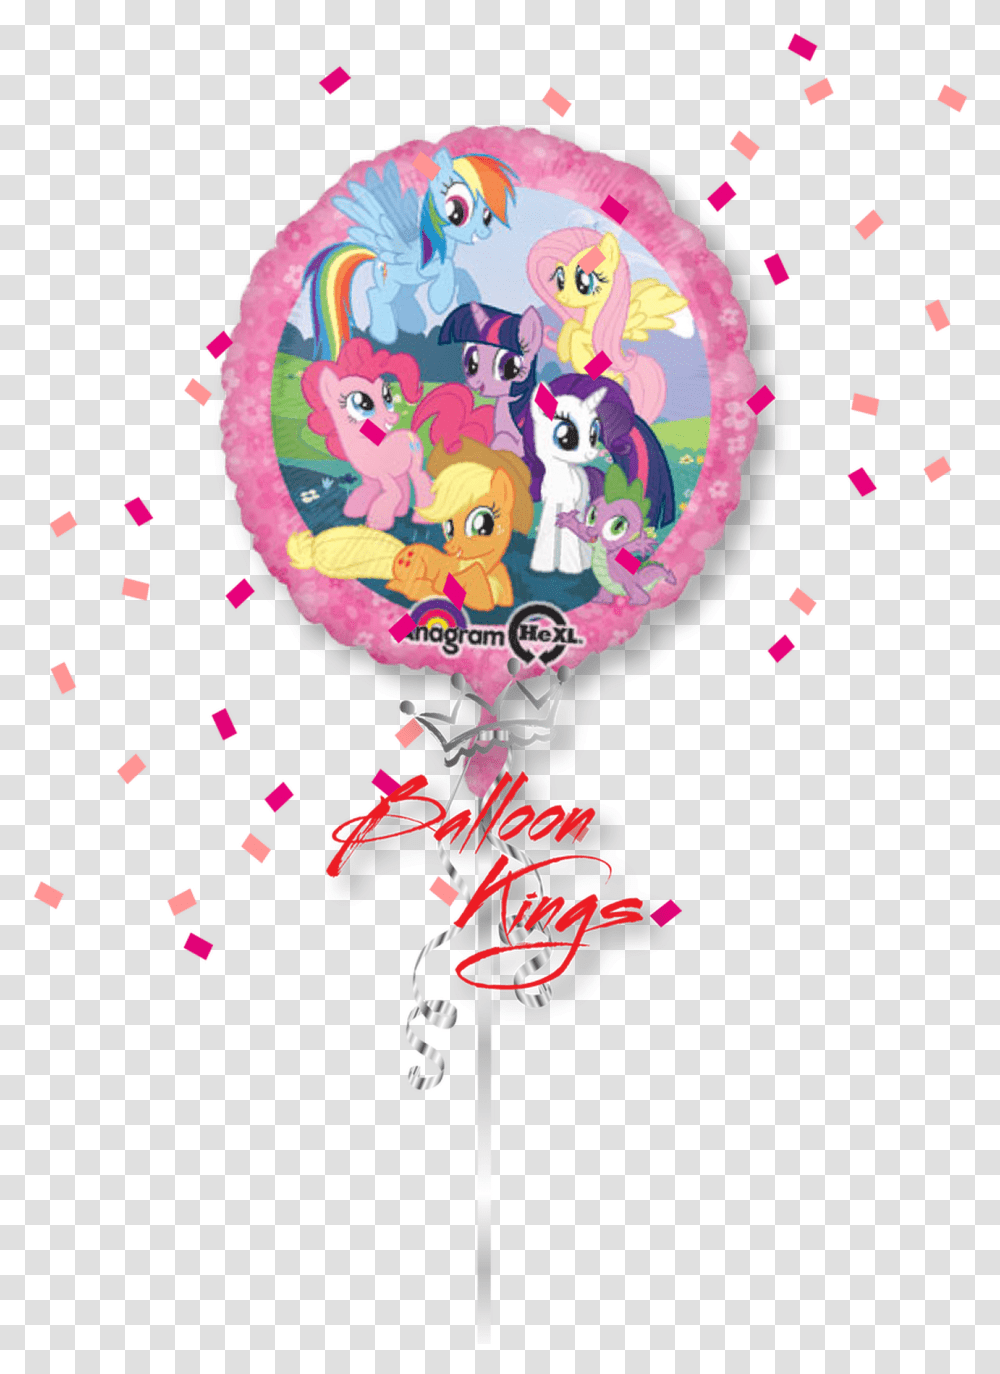 My Little Pony Round My Little Pony Balloon, Paper, Confetti Transparent Png